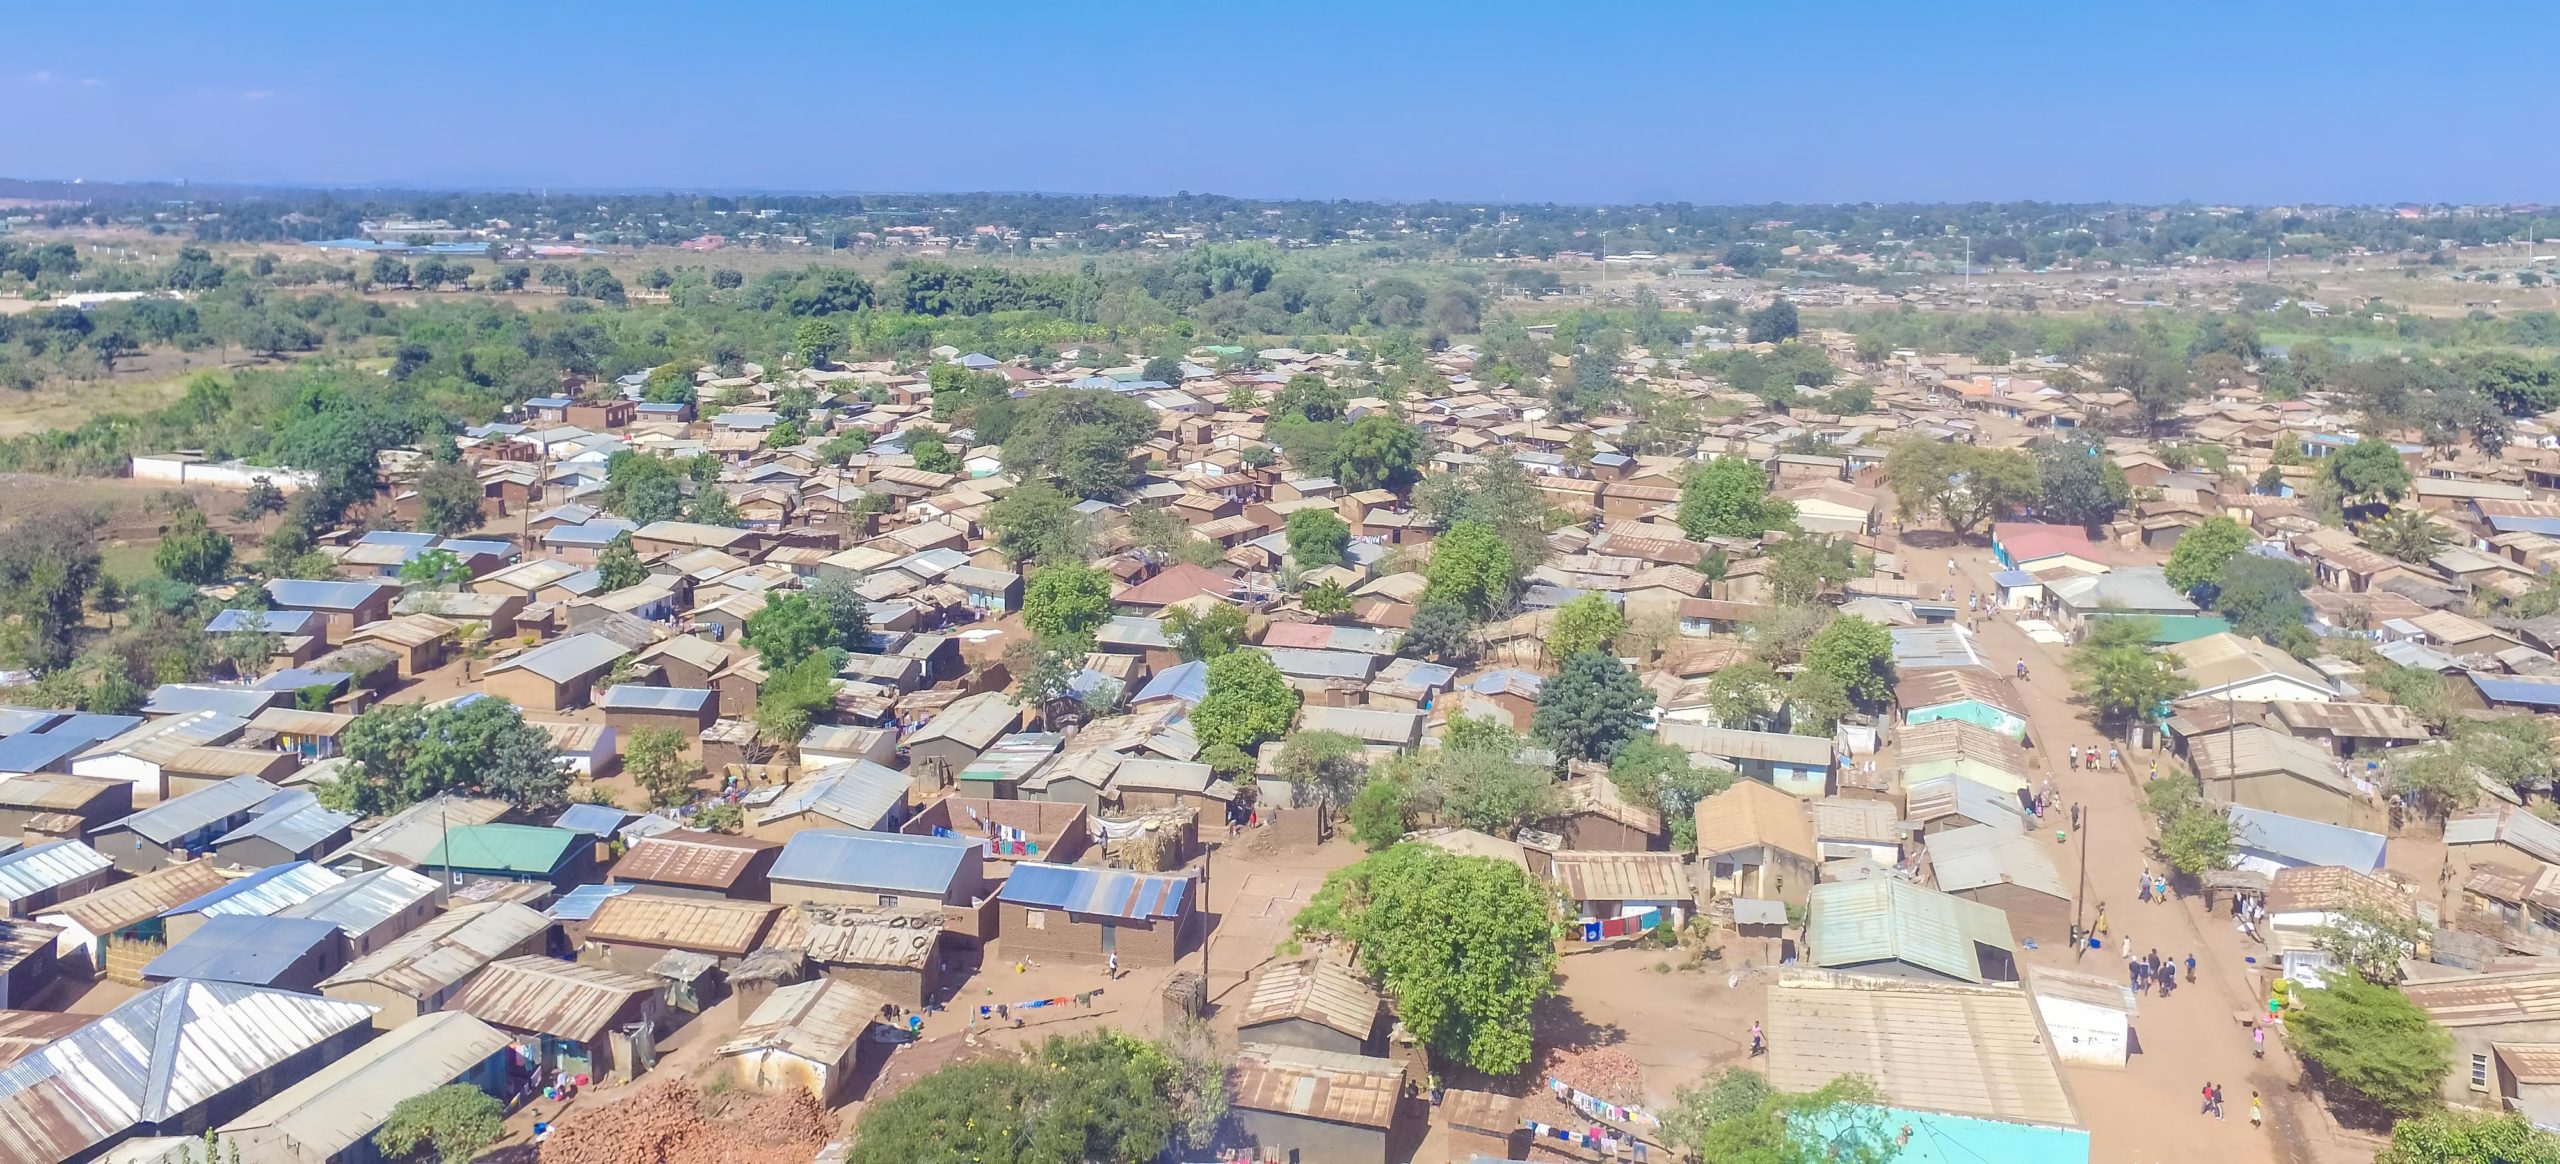 Enhancing Disaster Resilience: GEM's Role in Malawi's Multi-Hazard Risk Project - GEM Foundation